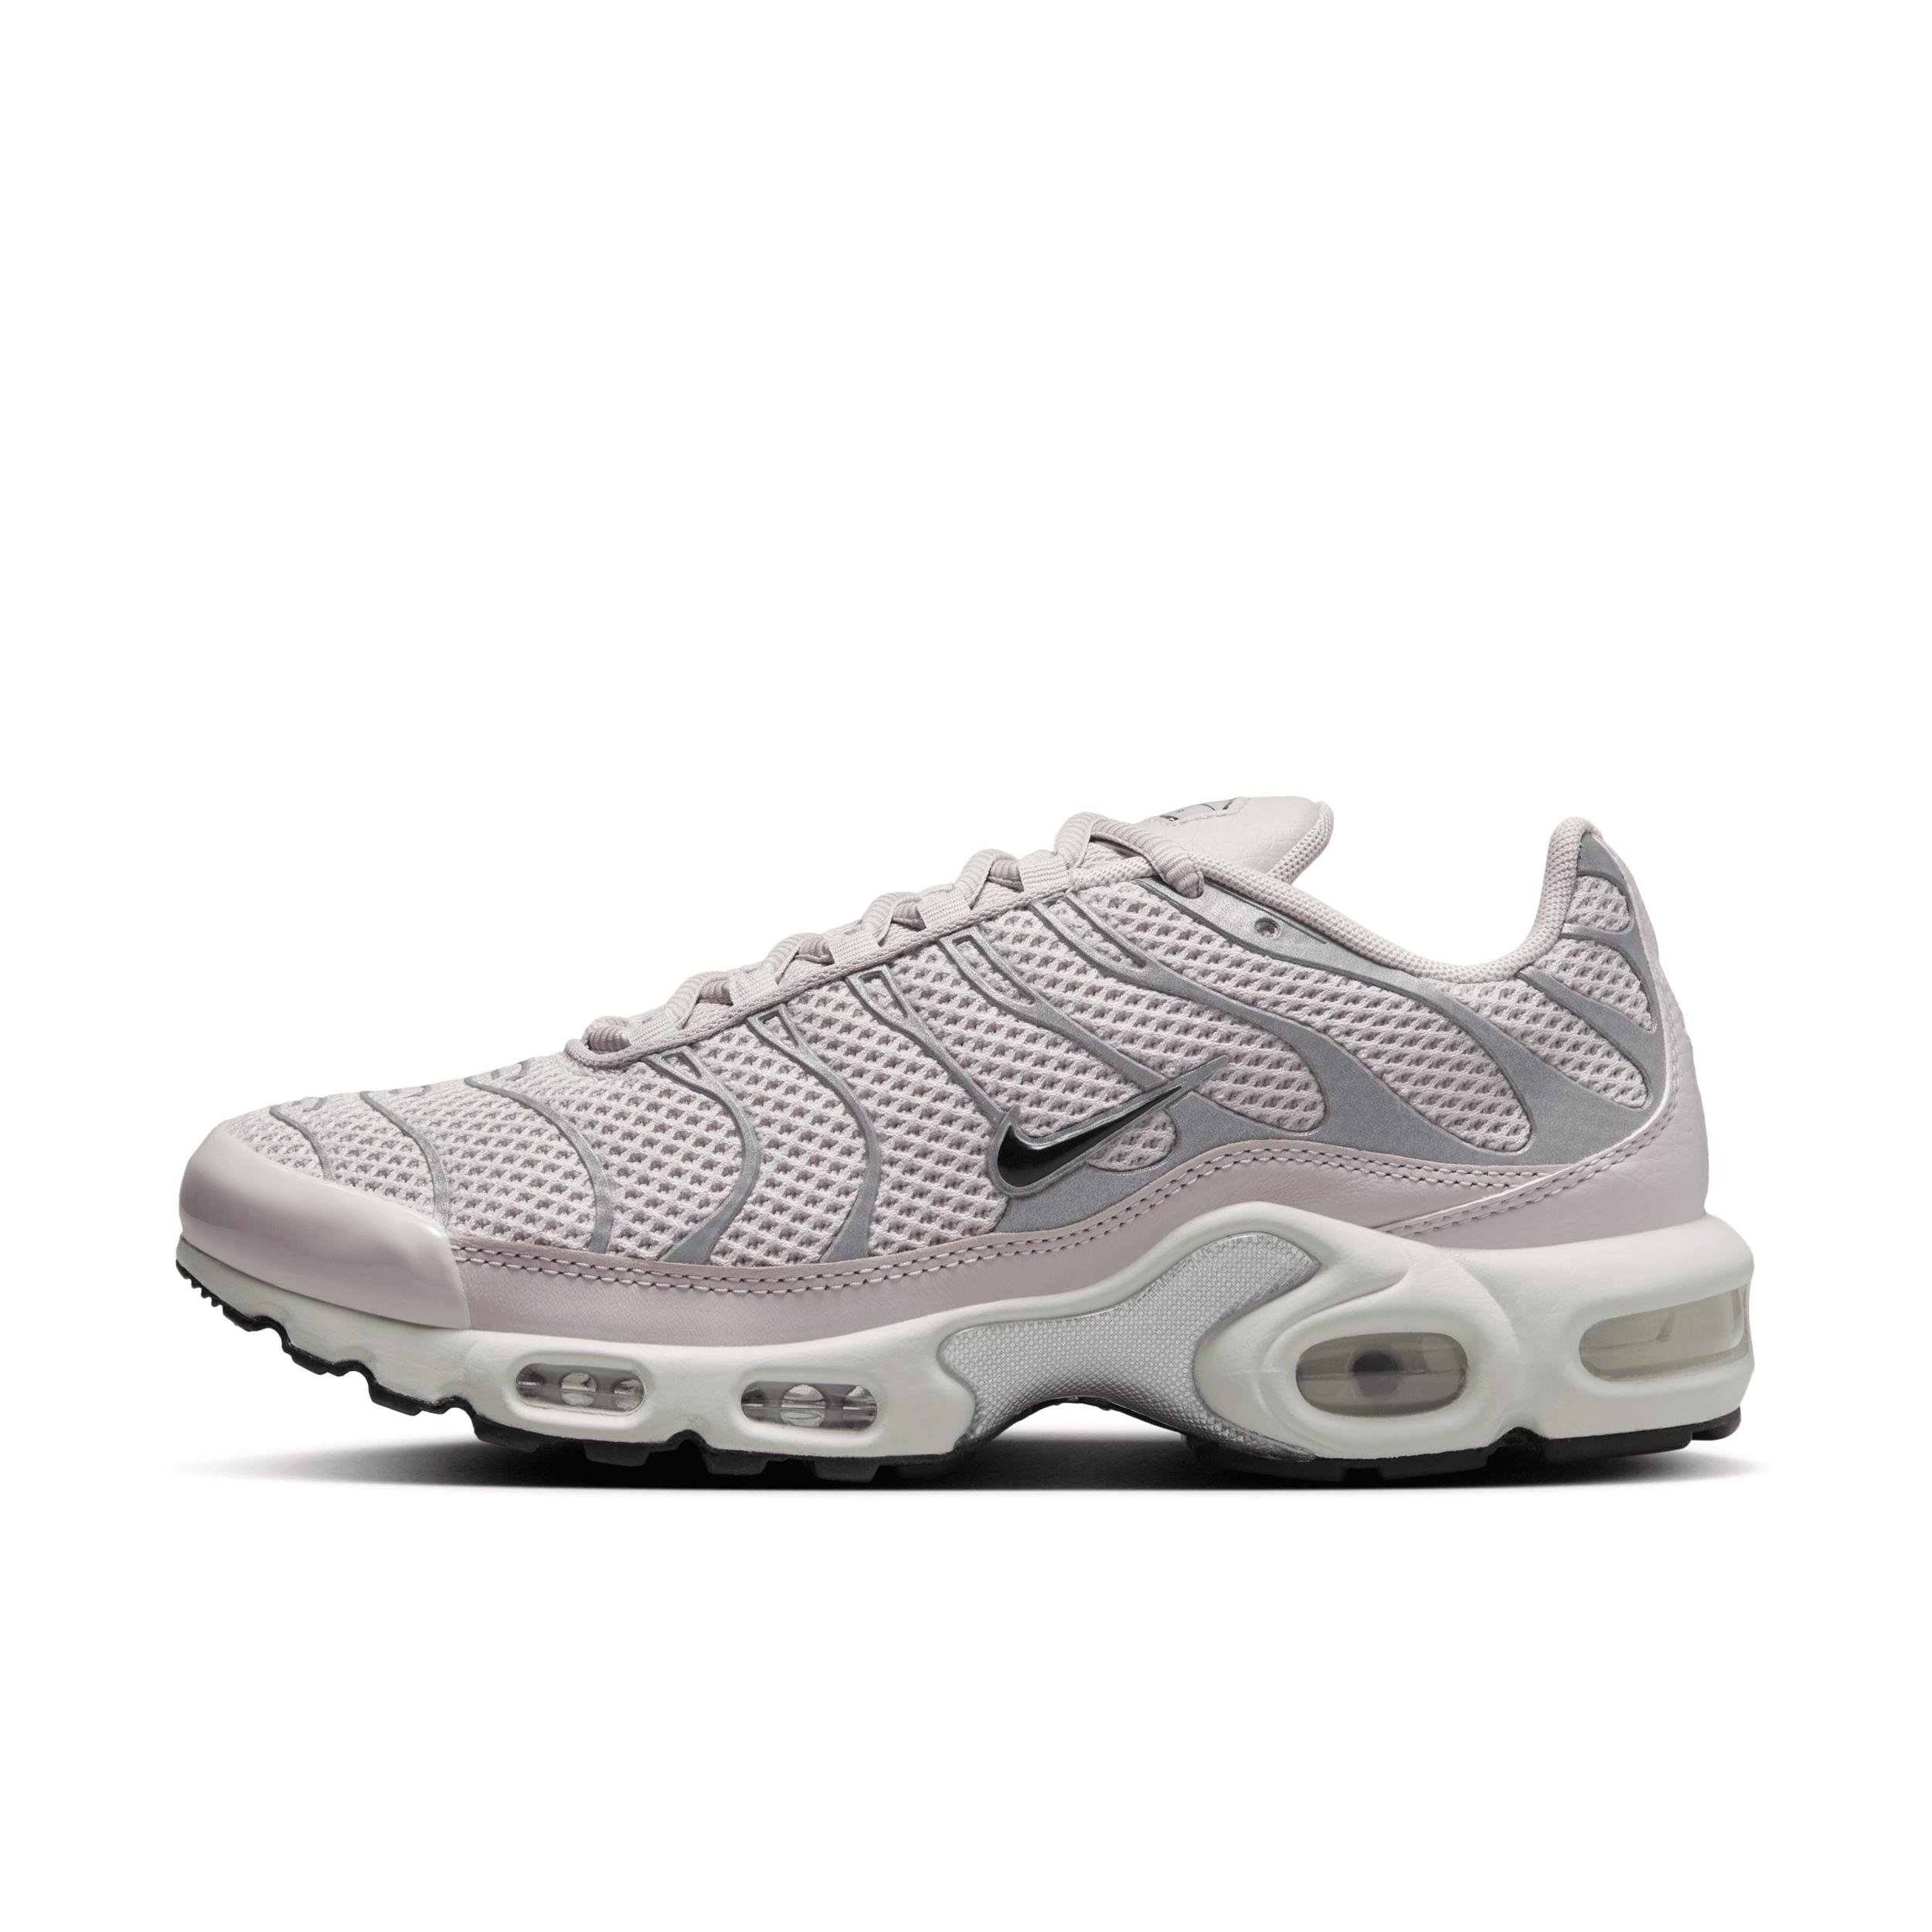 Nike Women's Air Max Plus Shoes by NIKE